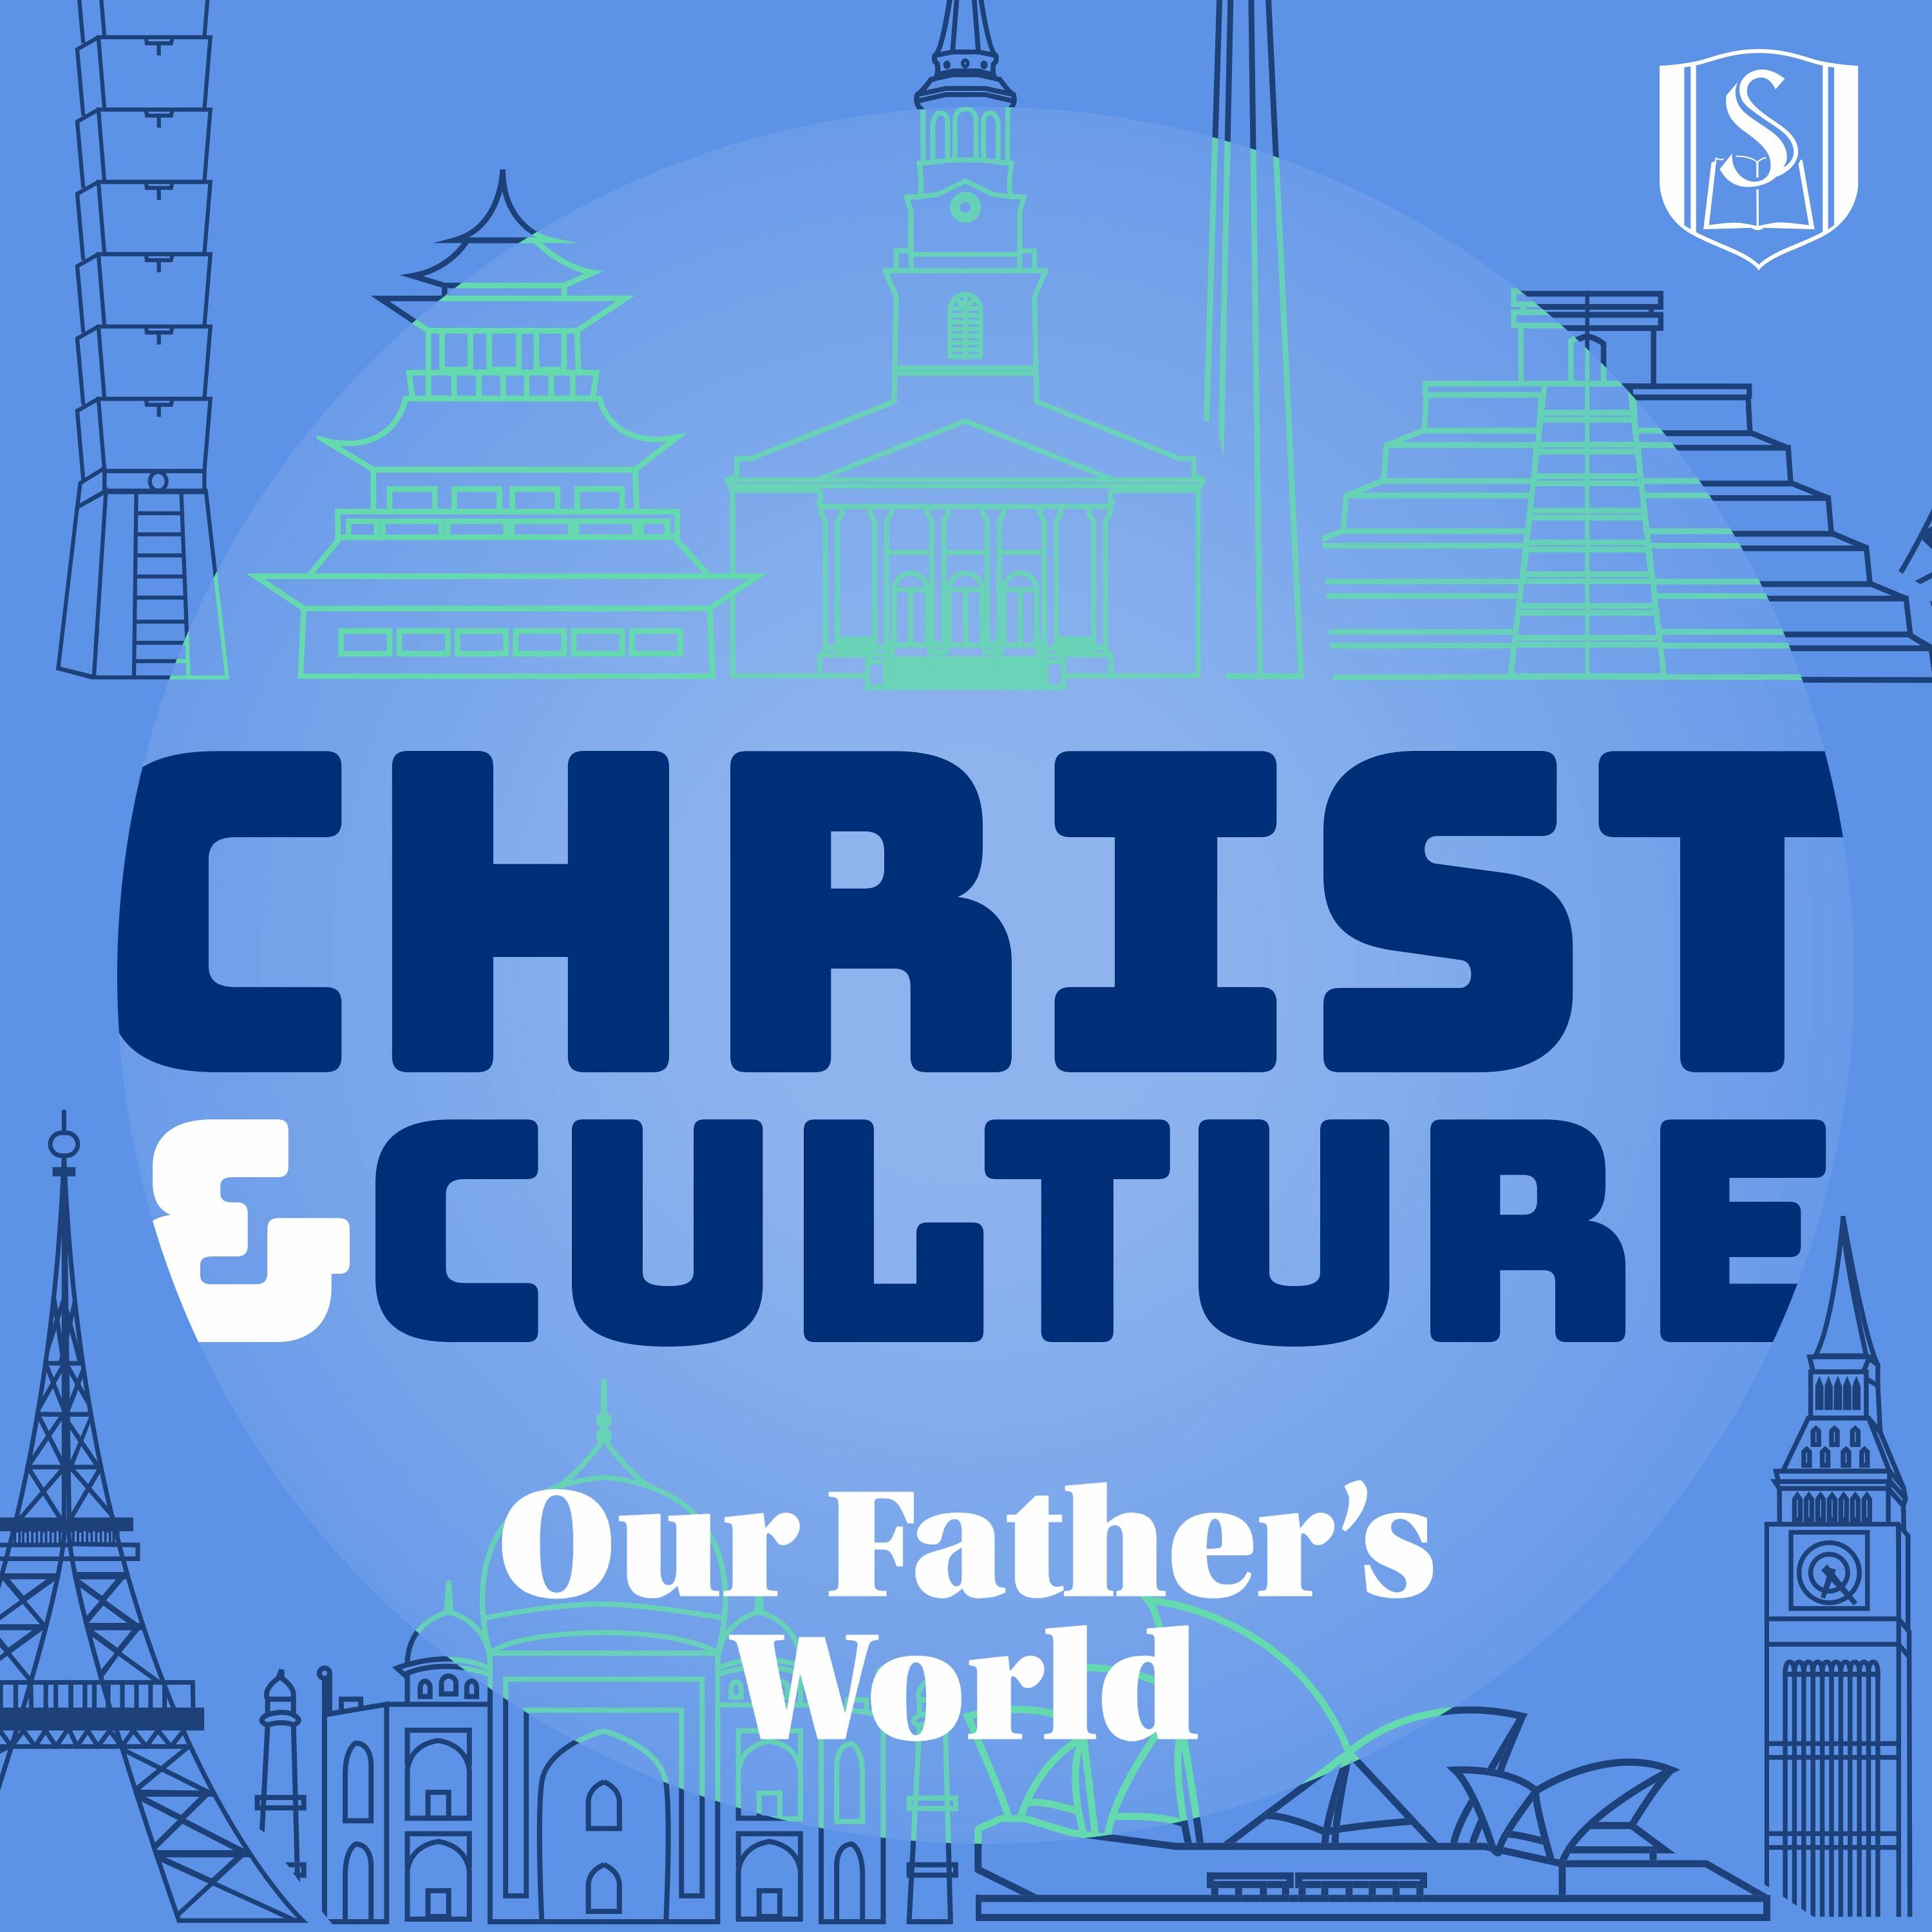 Mark Liederbach: Our Father’s World - EP36